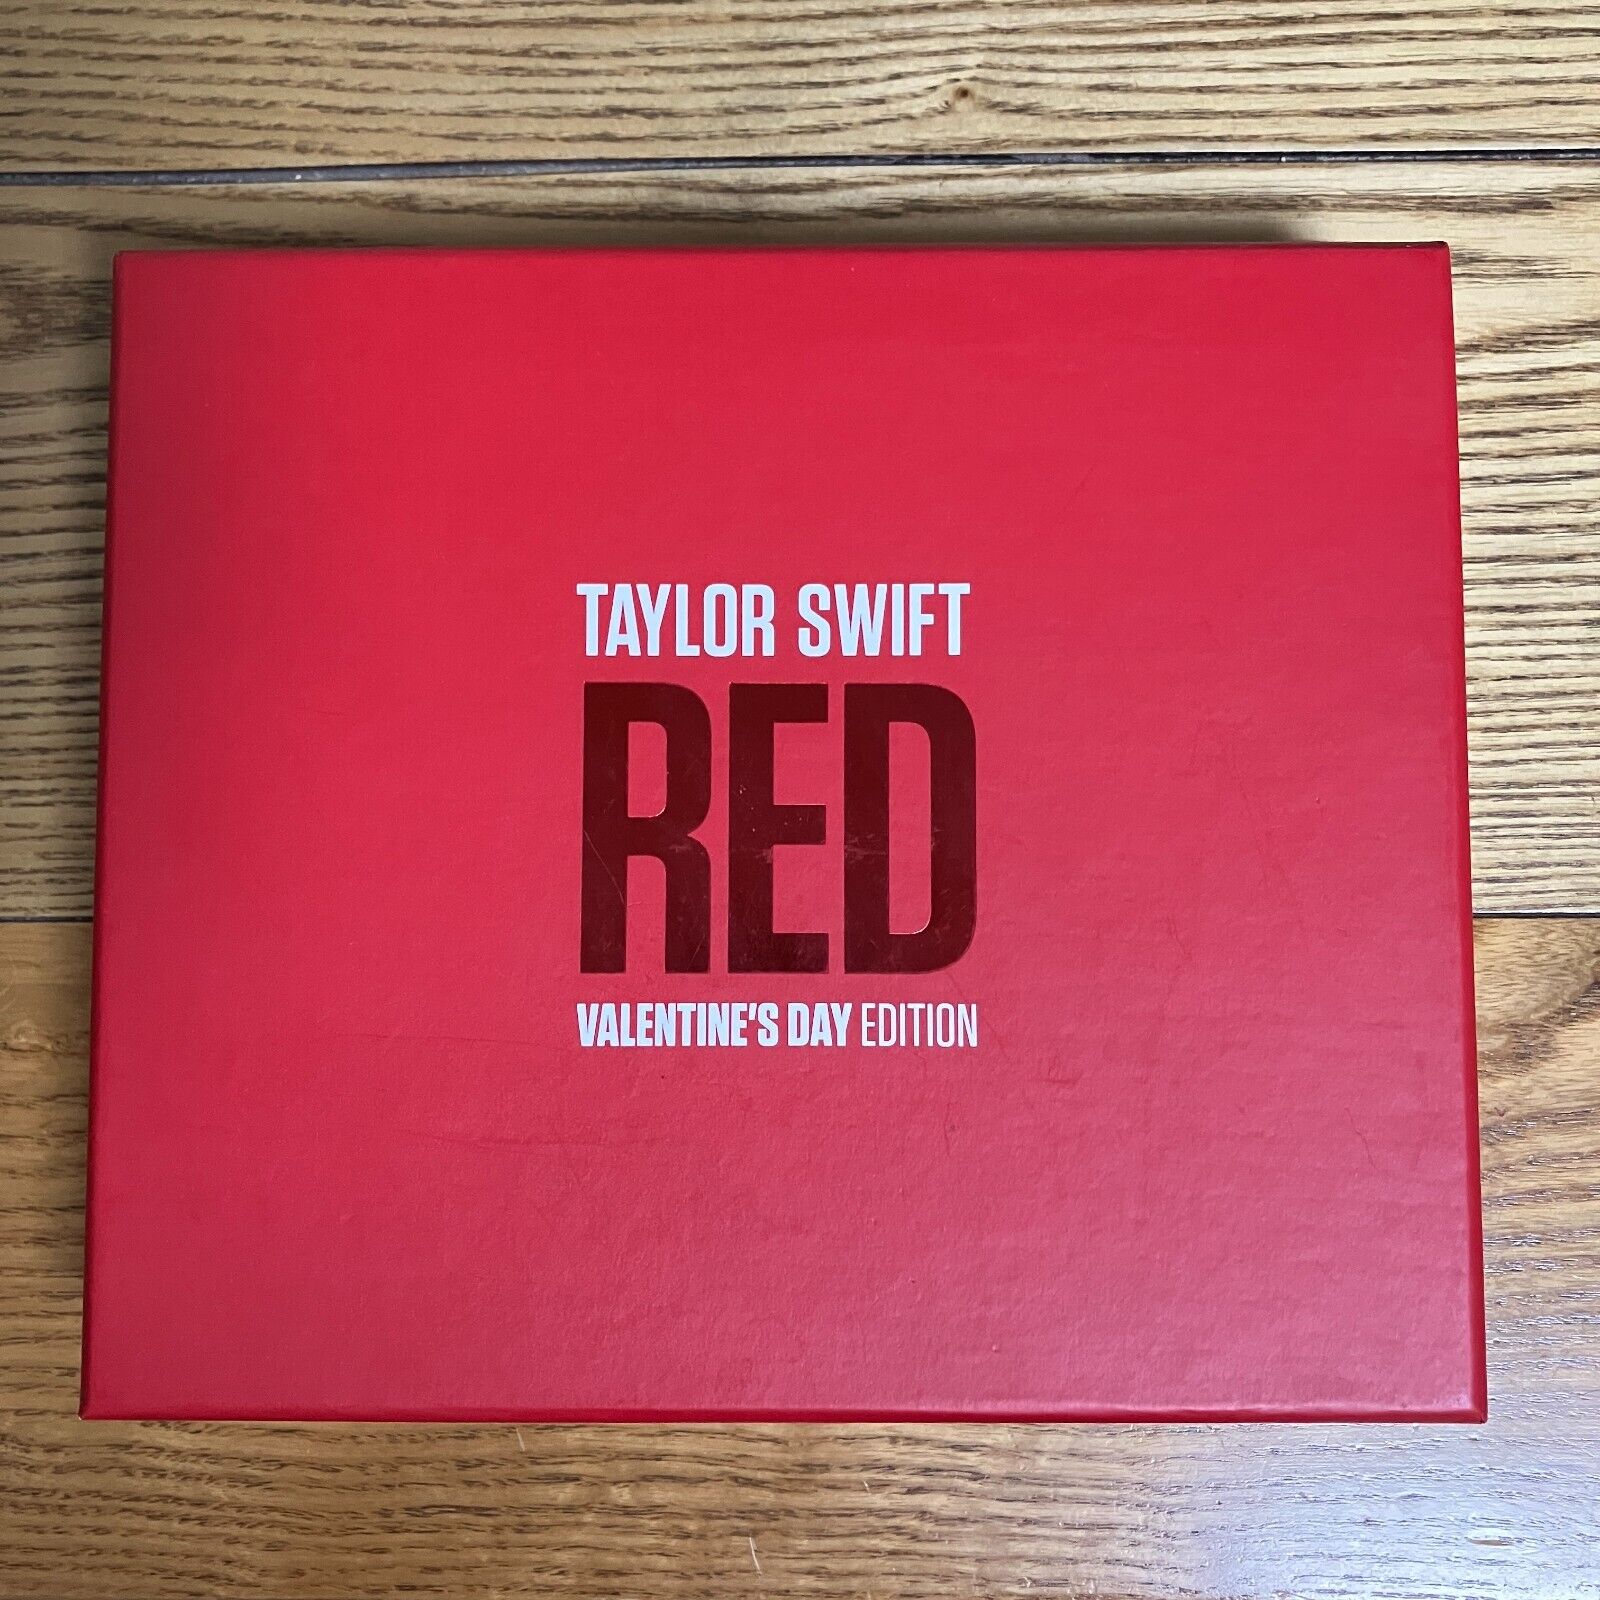 Taylor Swift – Red Valentine's Day Limited Edition Korea 2013 BOX CD Calendar